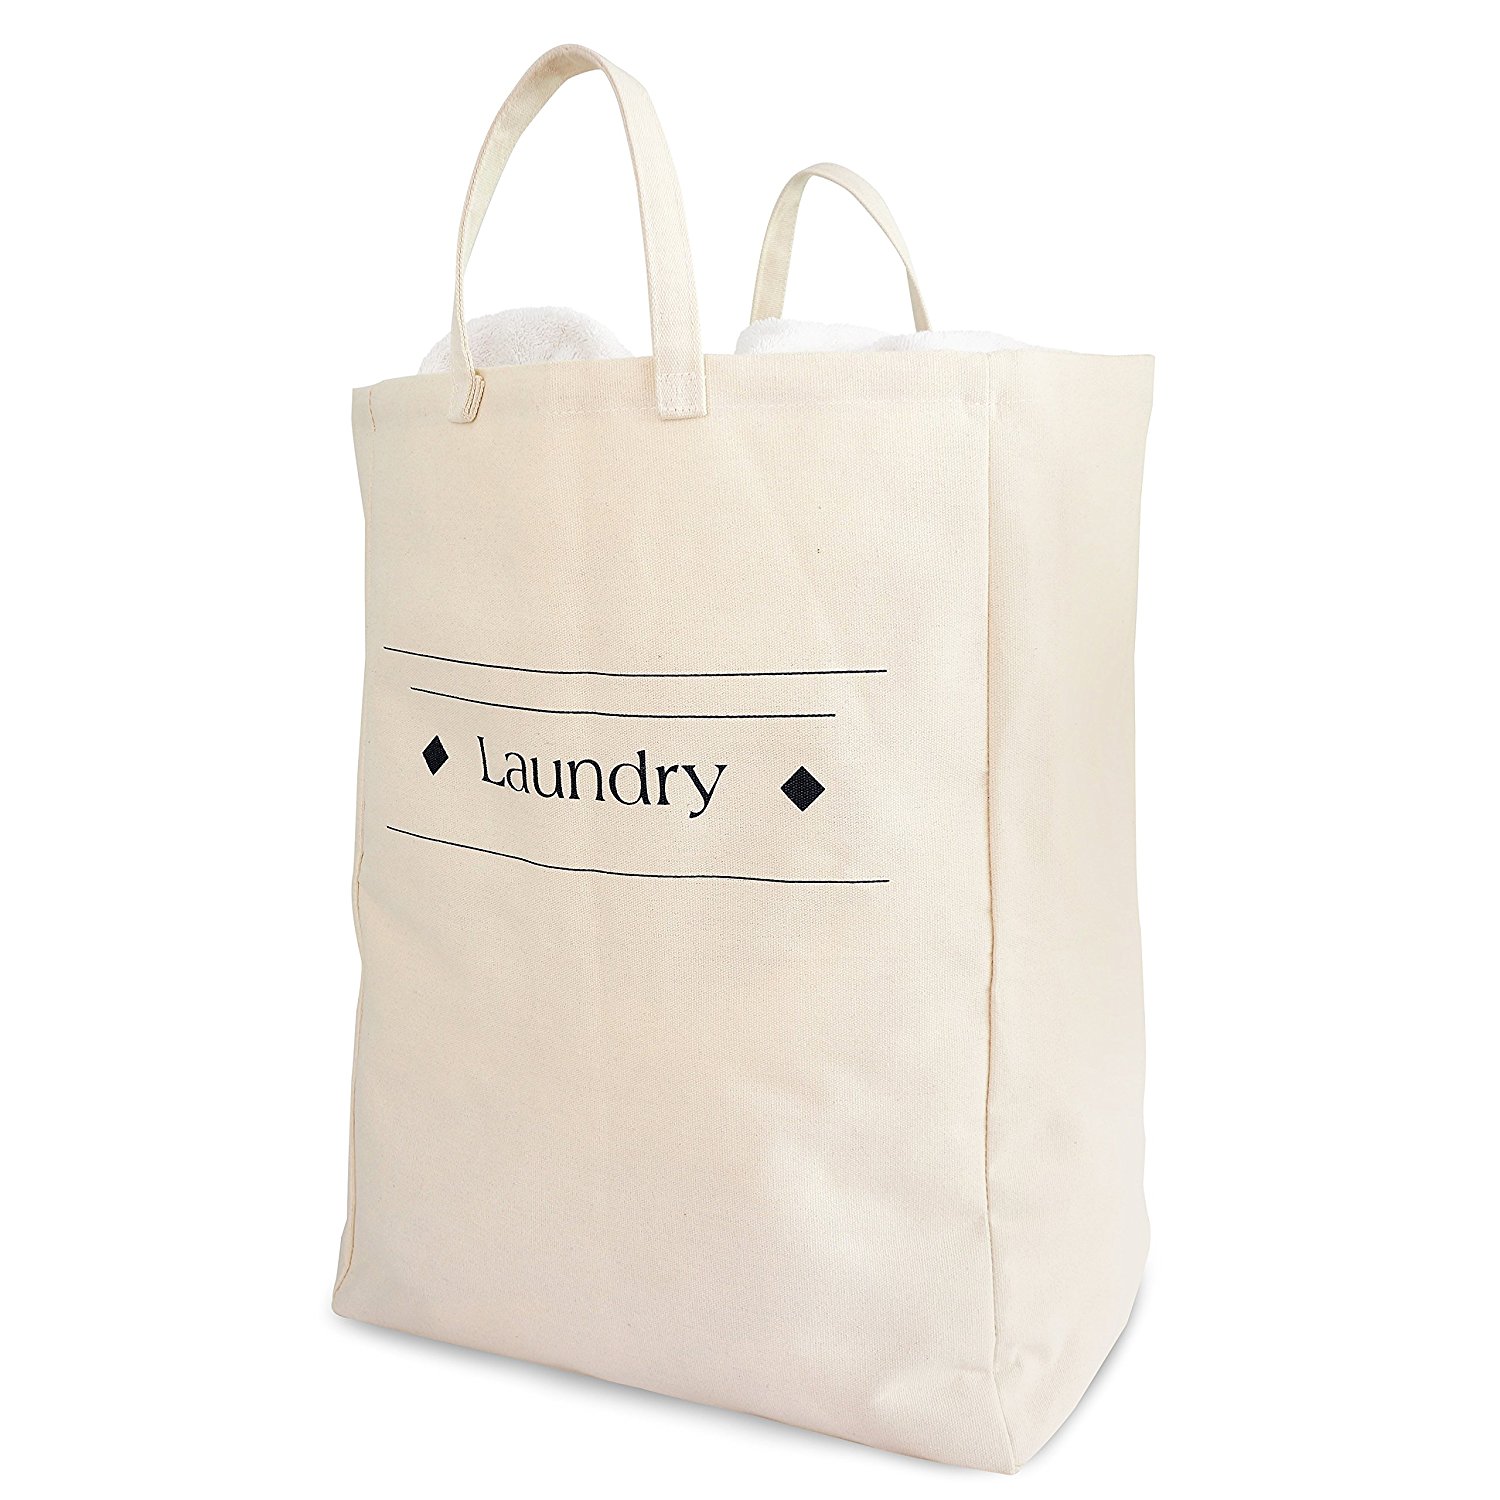 having a stylish laundry bag can make chores a little more fun.